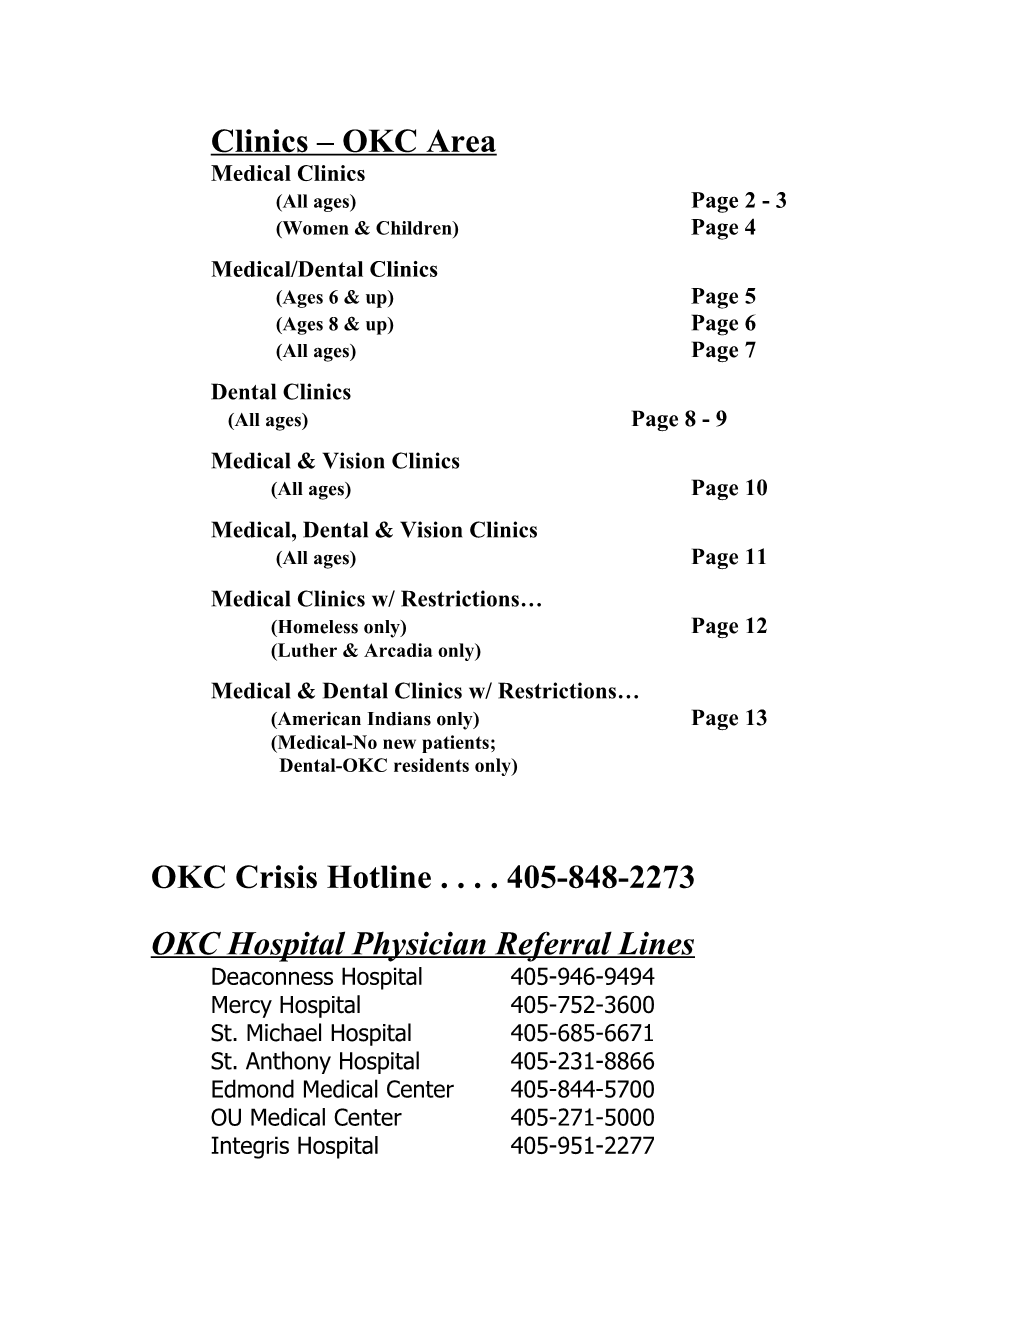 Medical Clinics (All Ages) Page 2 - 3